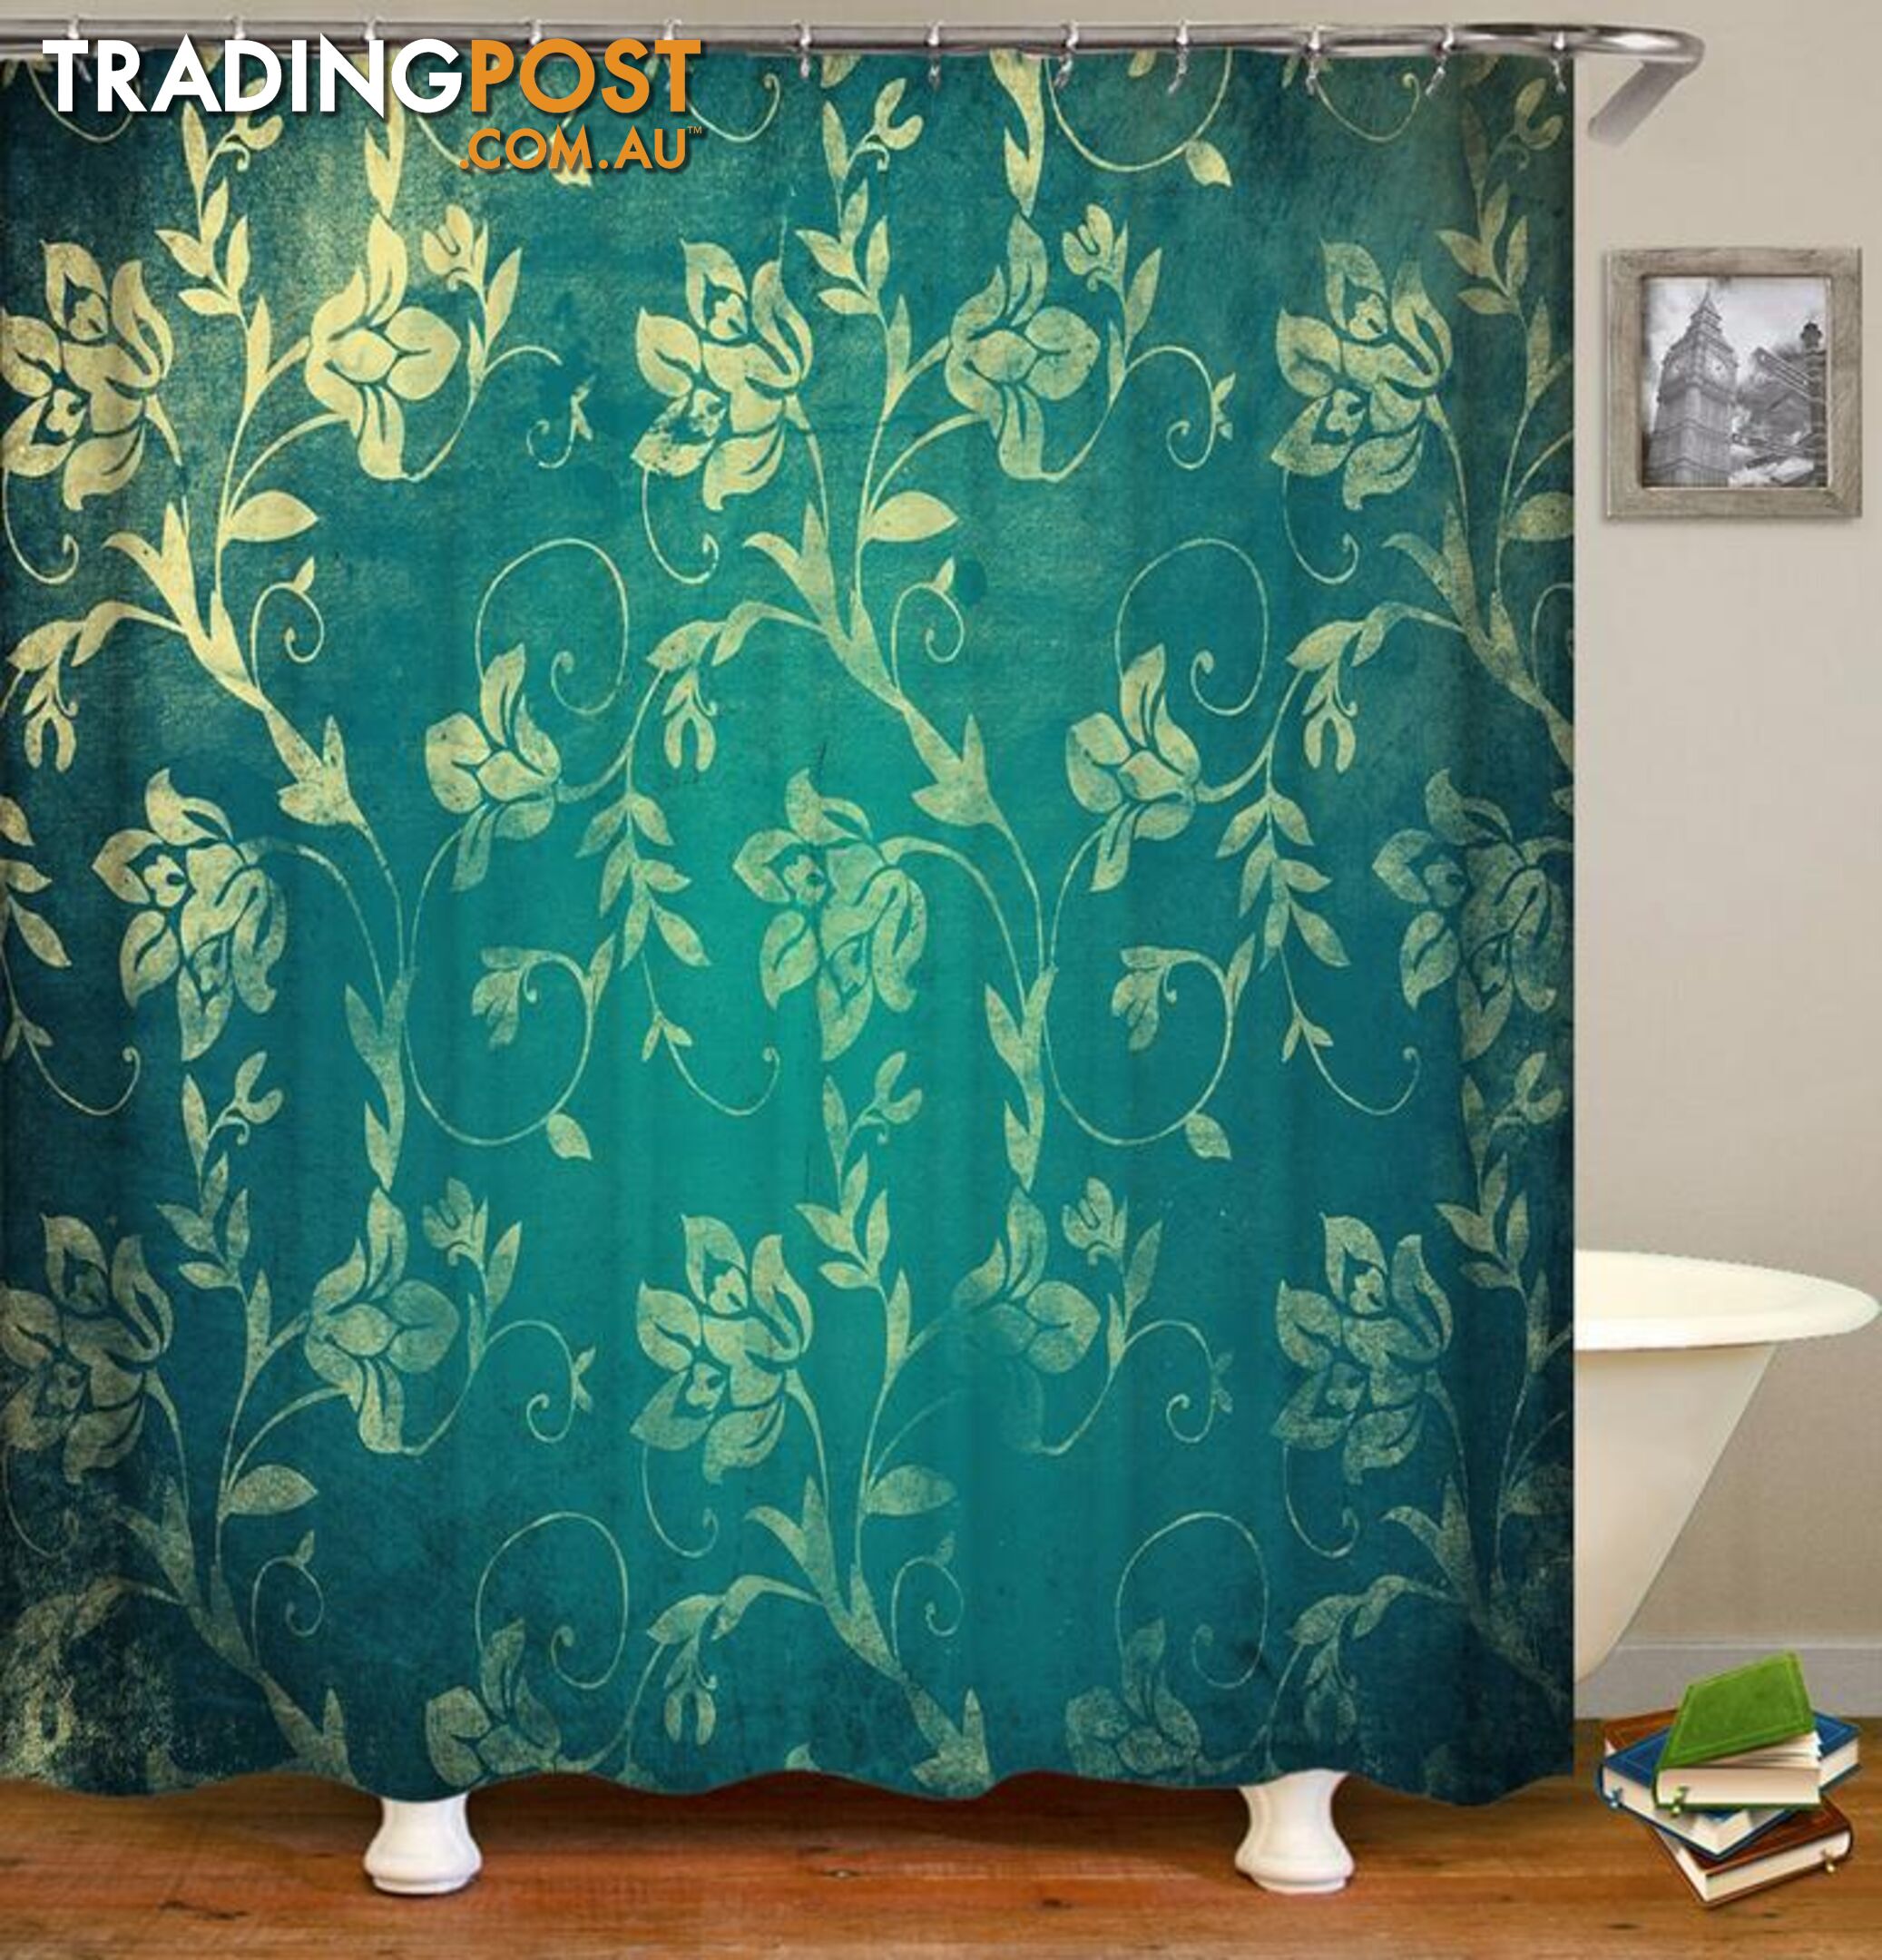 Yellow Flowers Over The Turquoise Shower Curtain - Curtain - 7427045938991